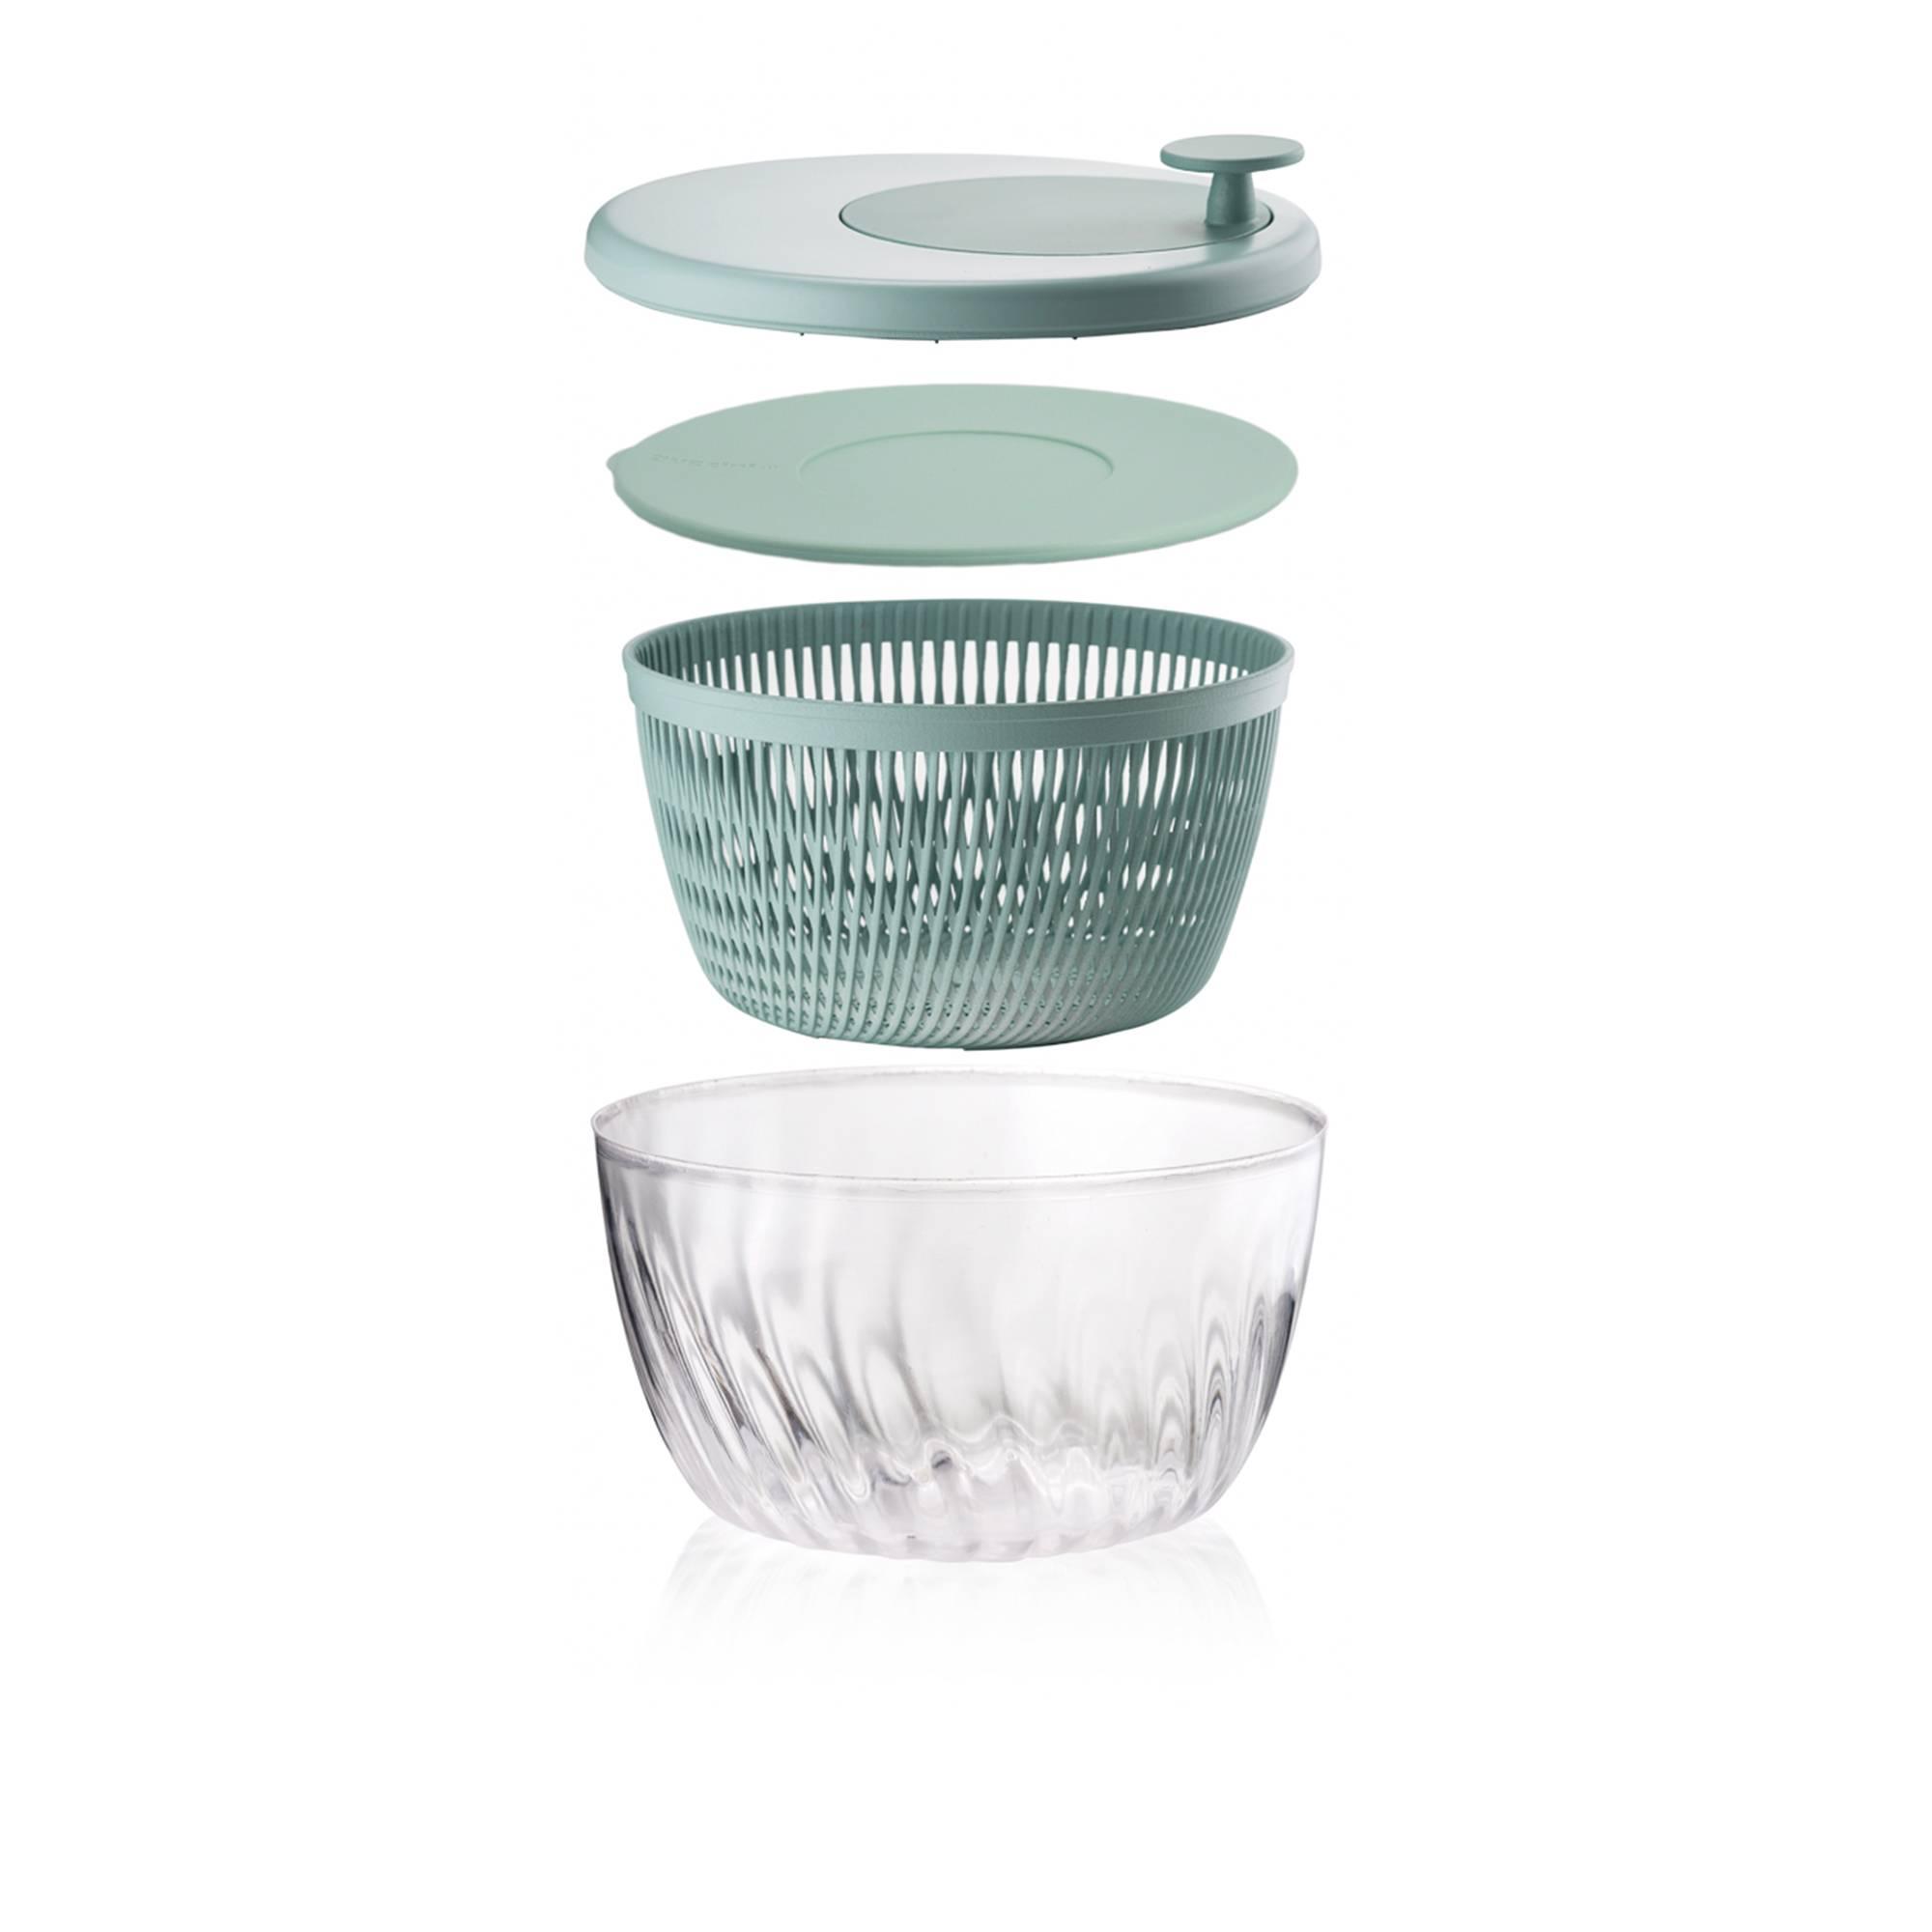 Guzzini Spin & Store Salad Spinner Green Image 6